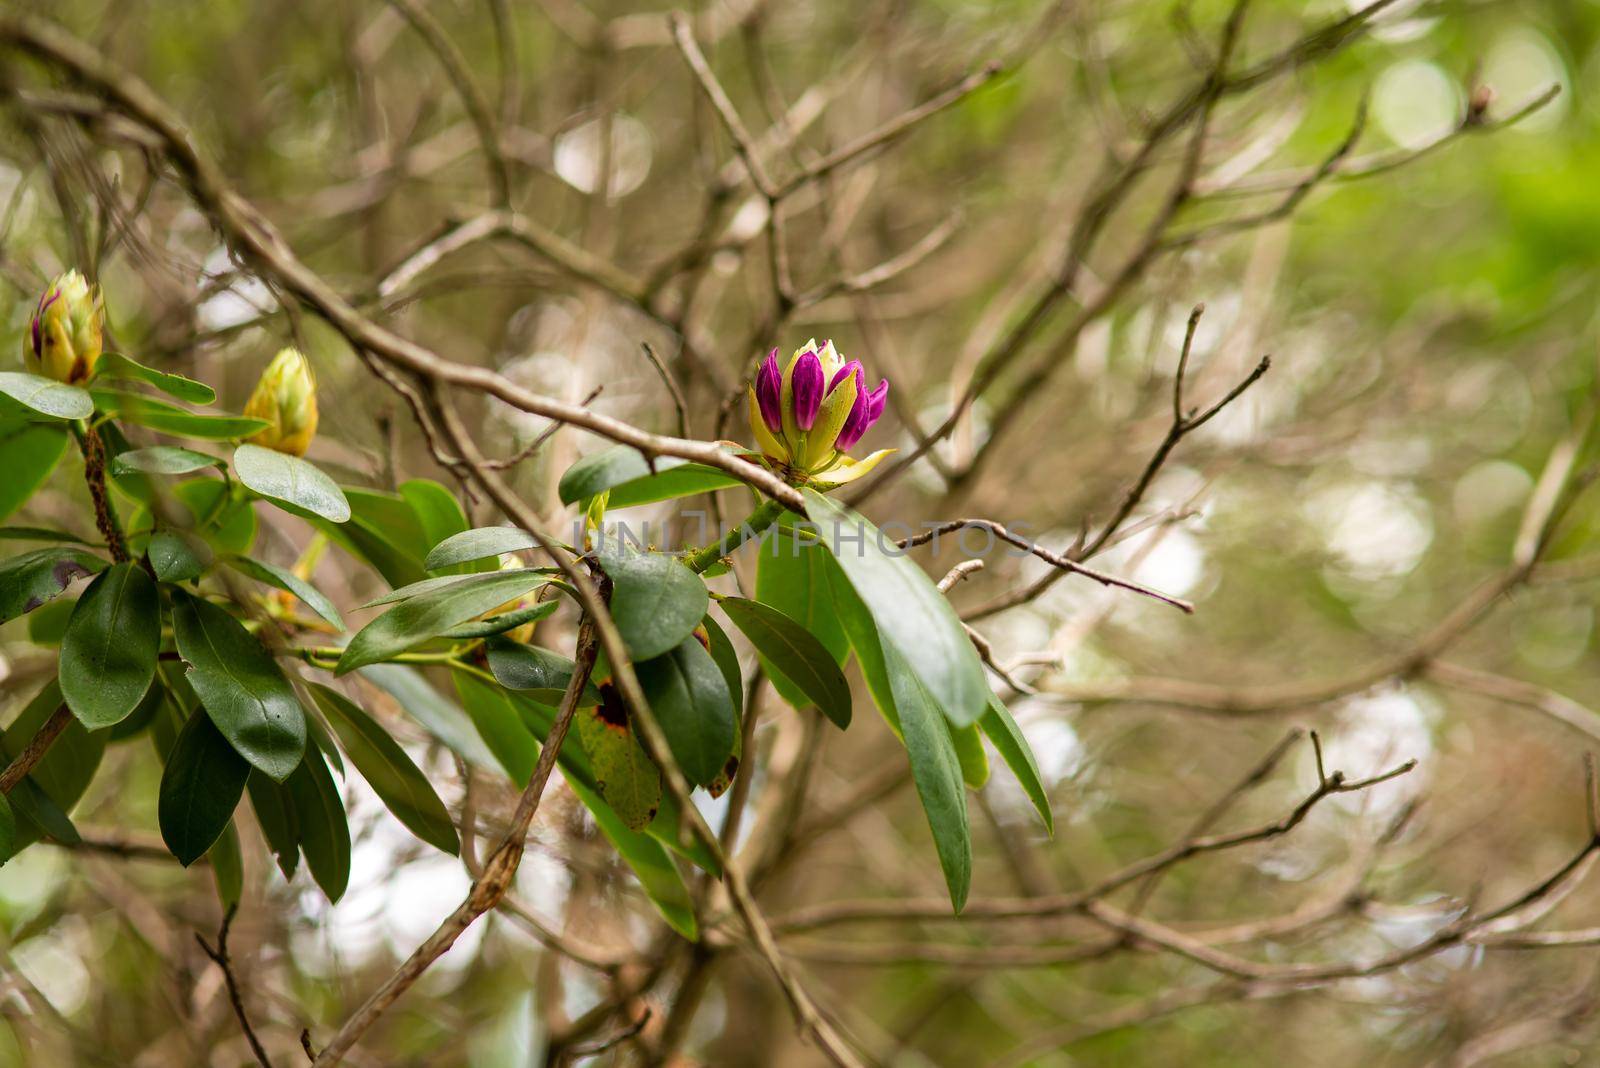 unblown purple rhododendron buds in the spring by ozornina